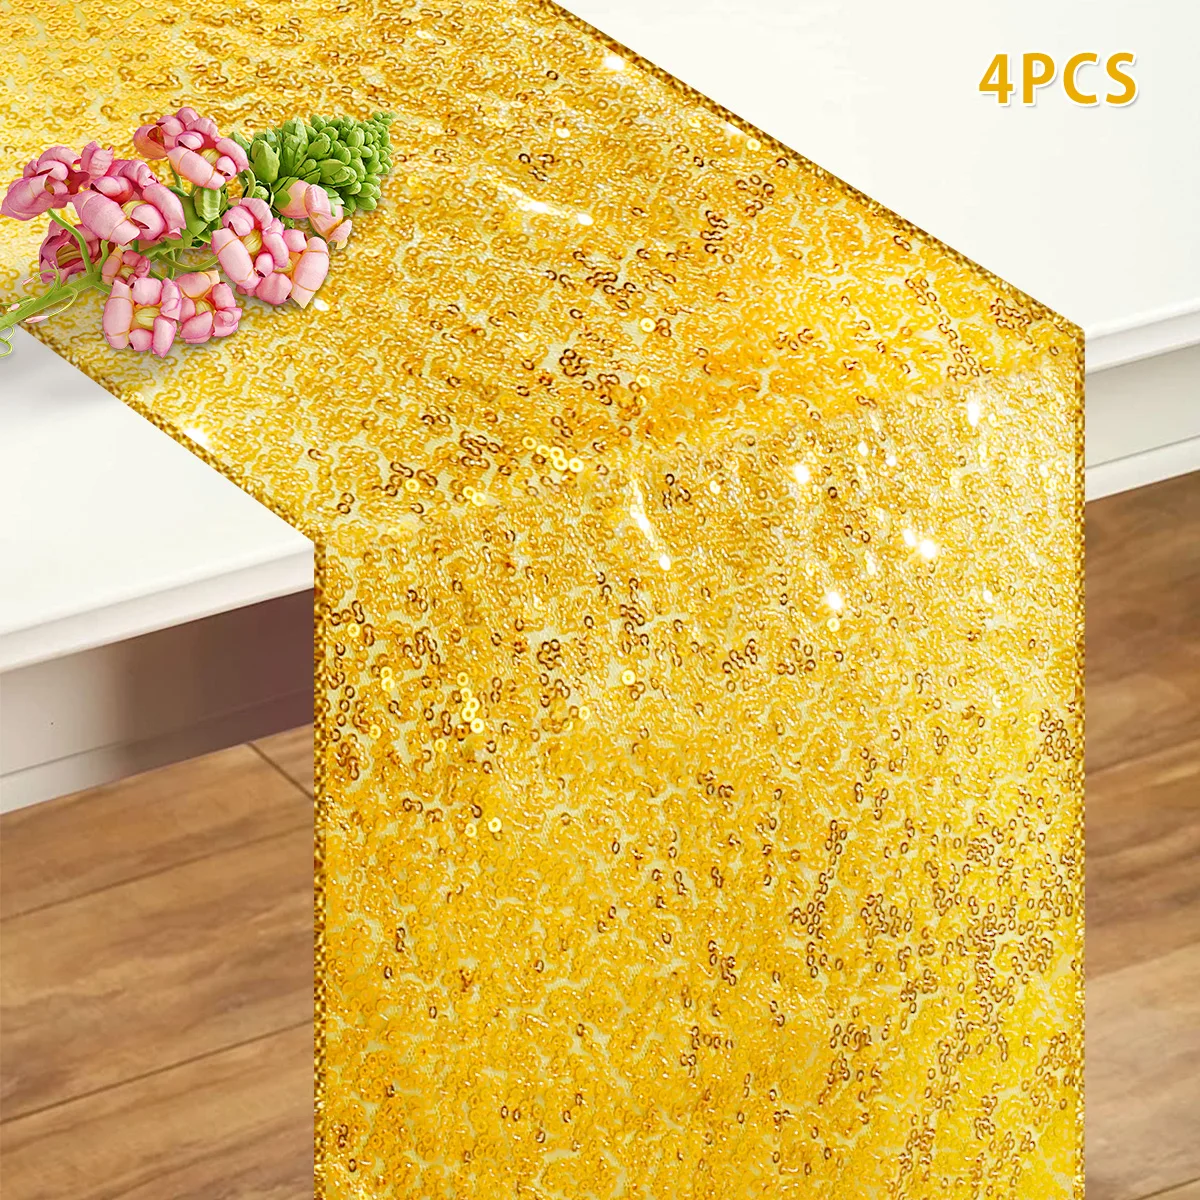 

4pcs Glitter Table Runners 12X108 inch Sequin Tablecloth Table Cover Supplies for Banquets Dinner Birthday Party Wedding Decor